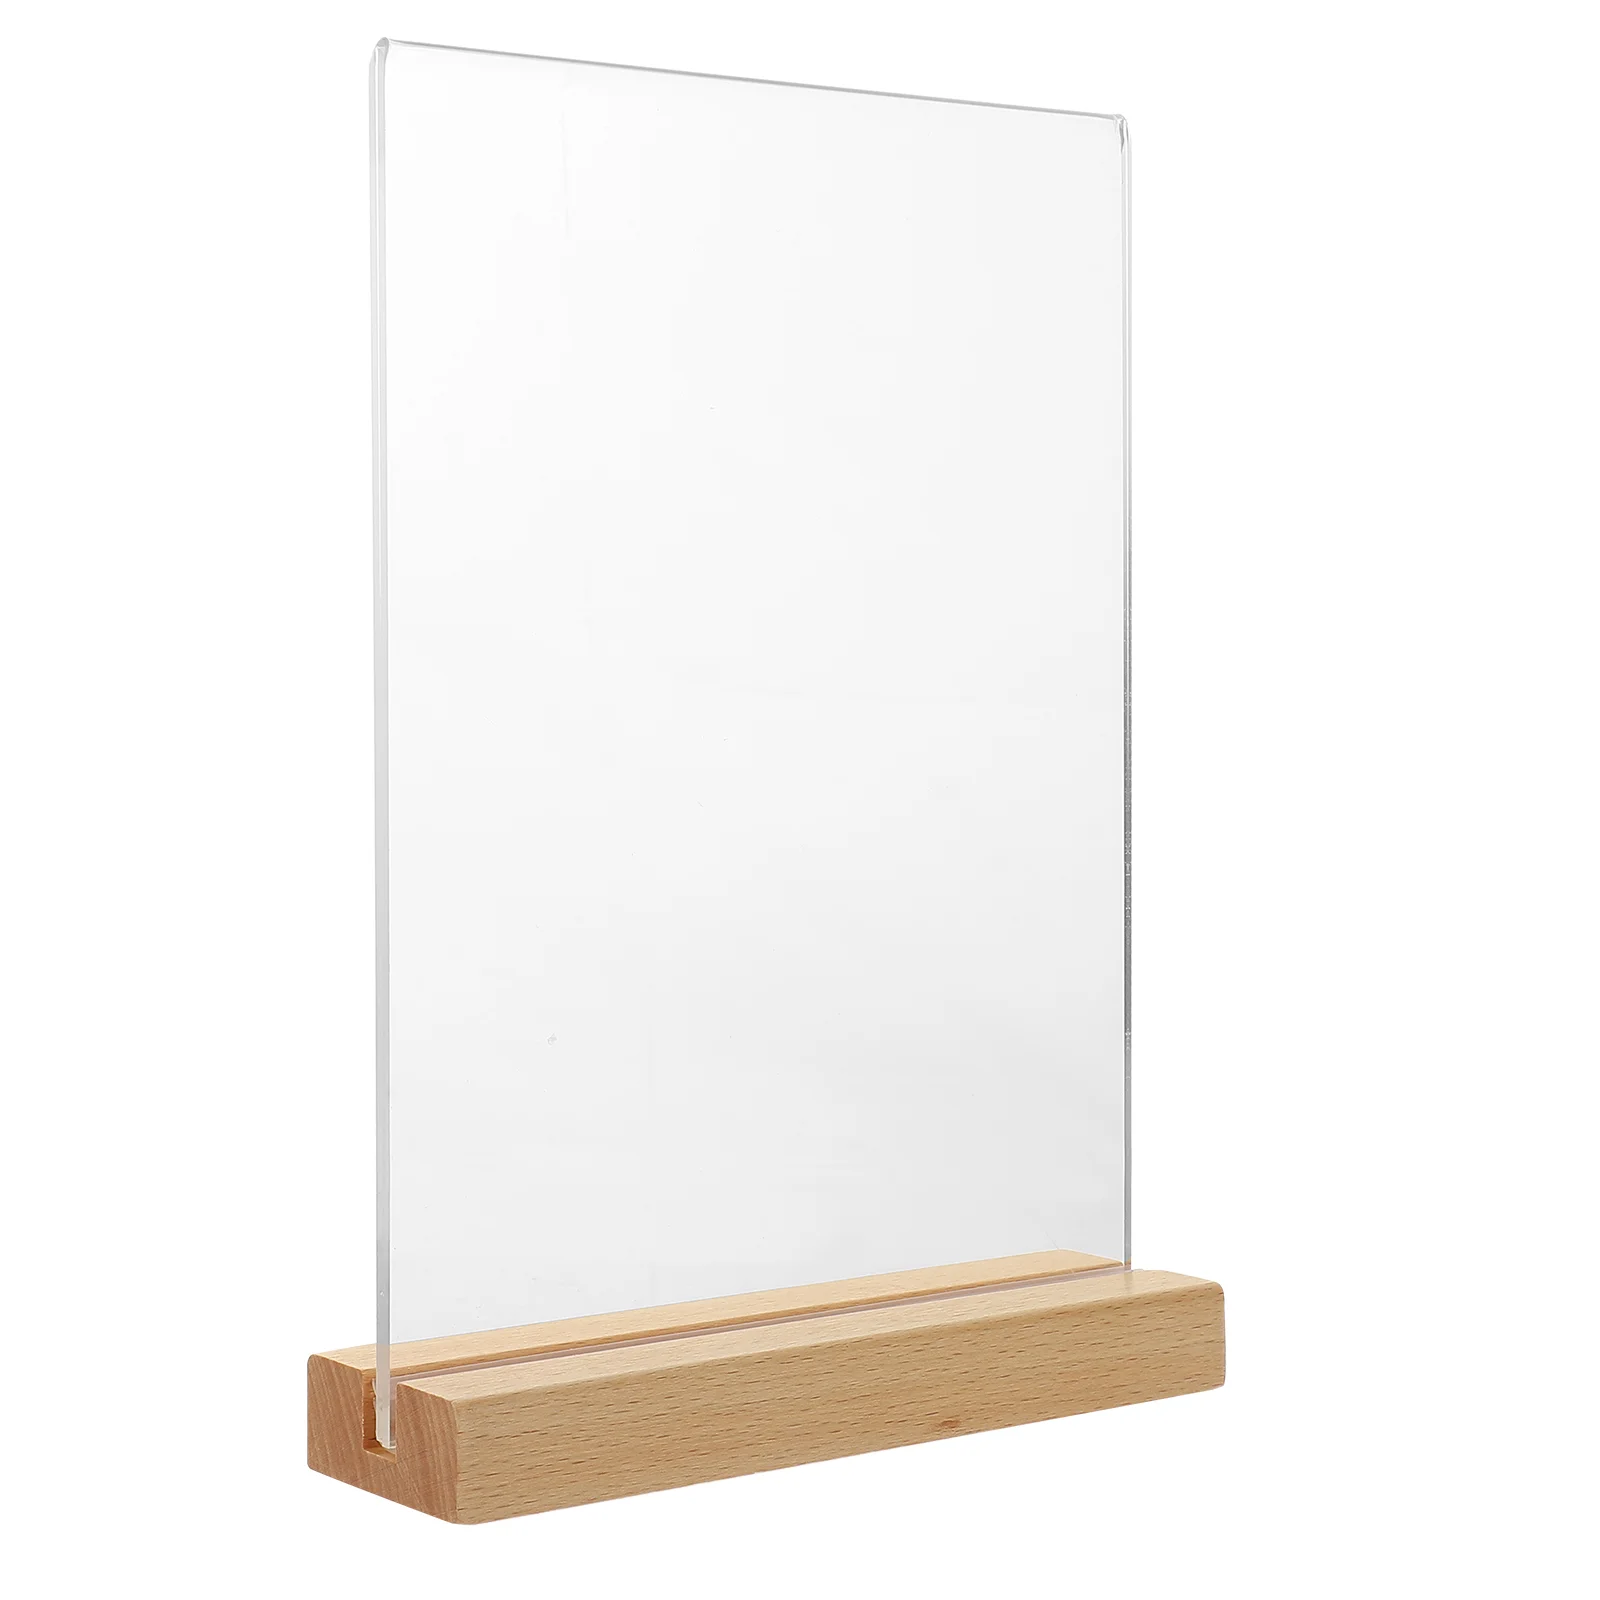 Acrylic Label Stand Menu Sign Holder Picture Frame Table Poster Stands Display Rack